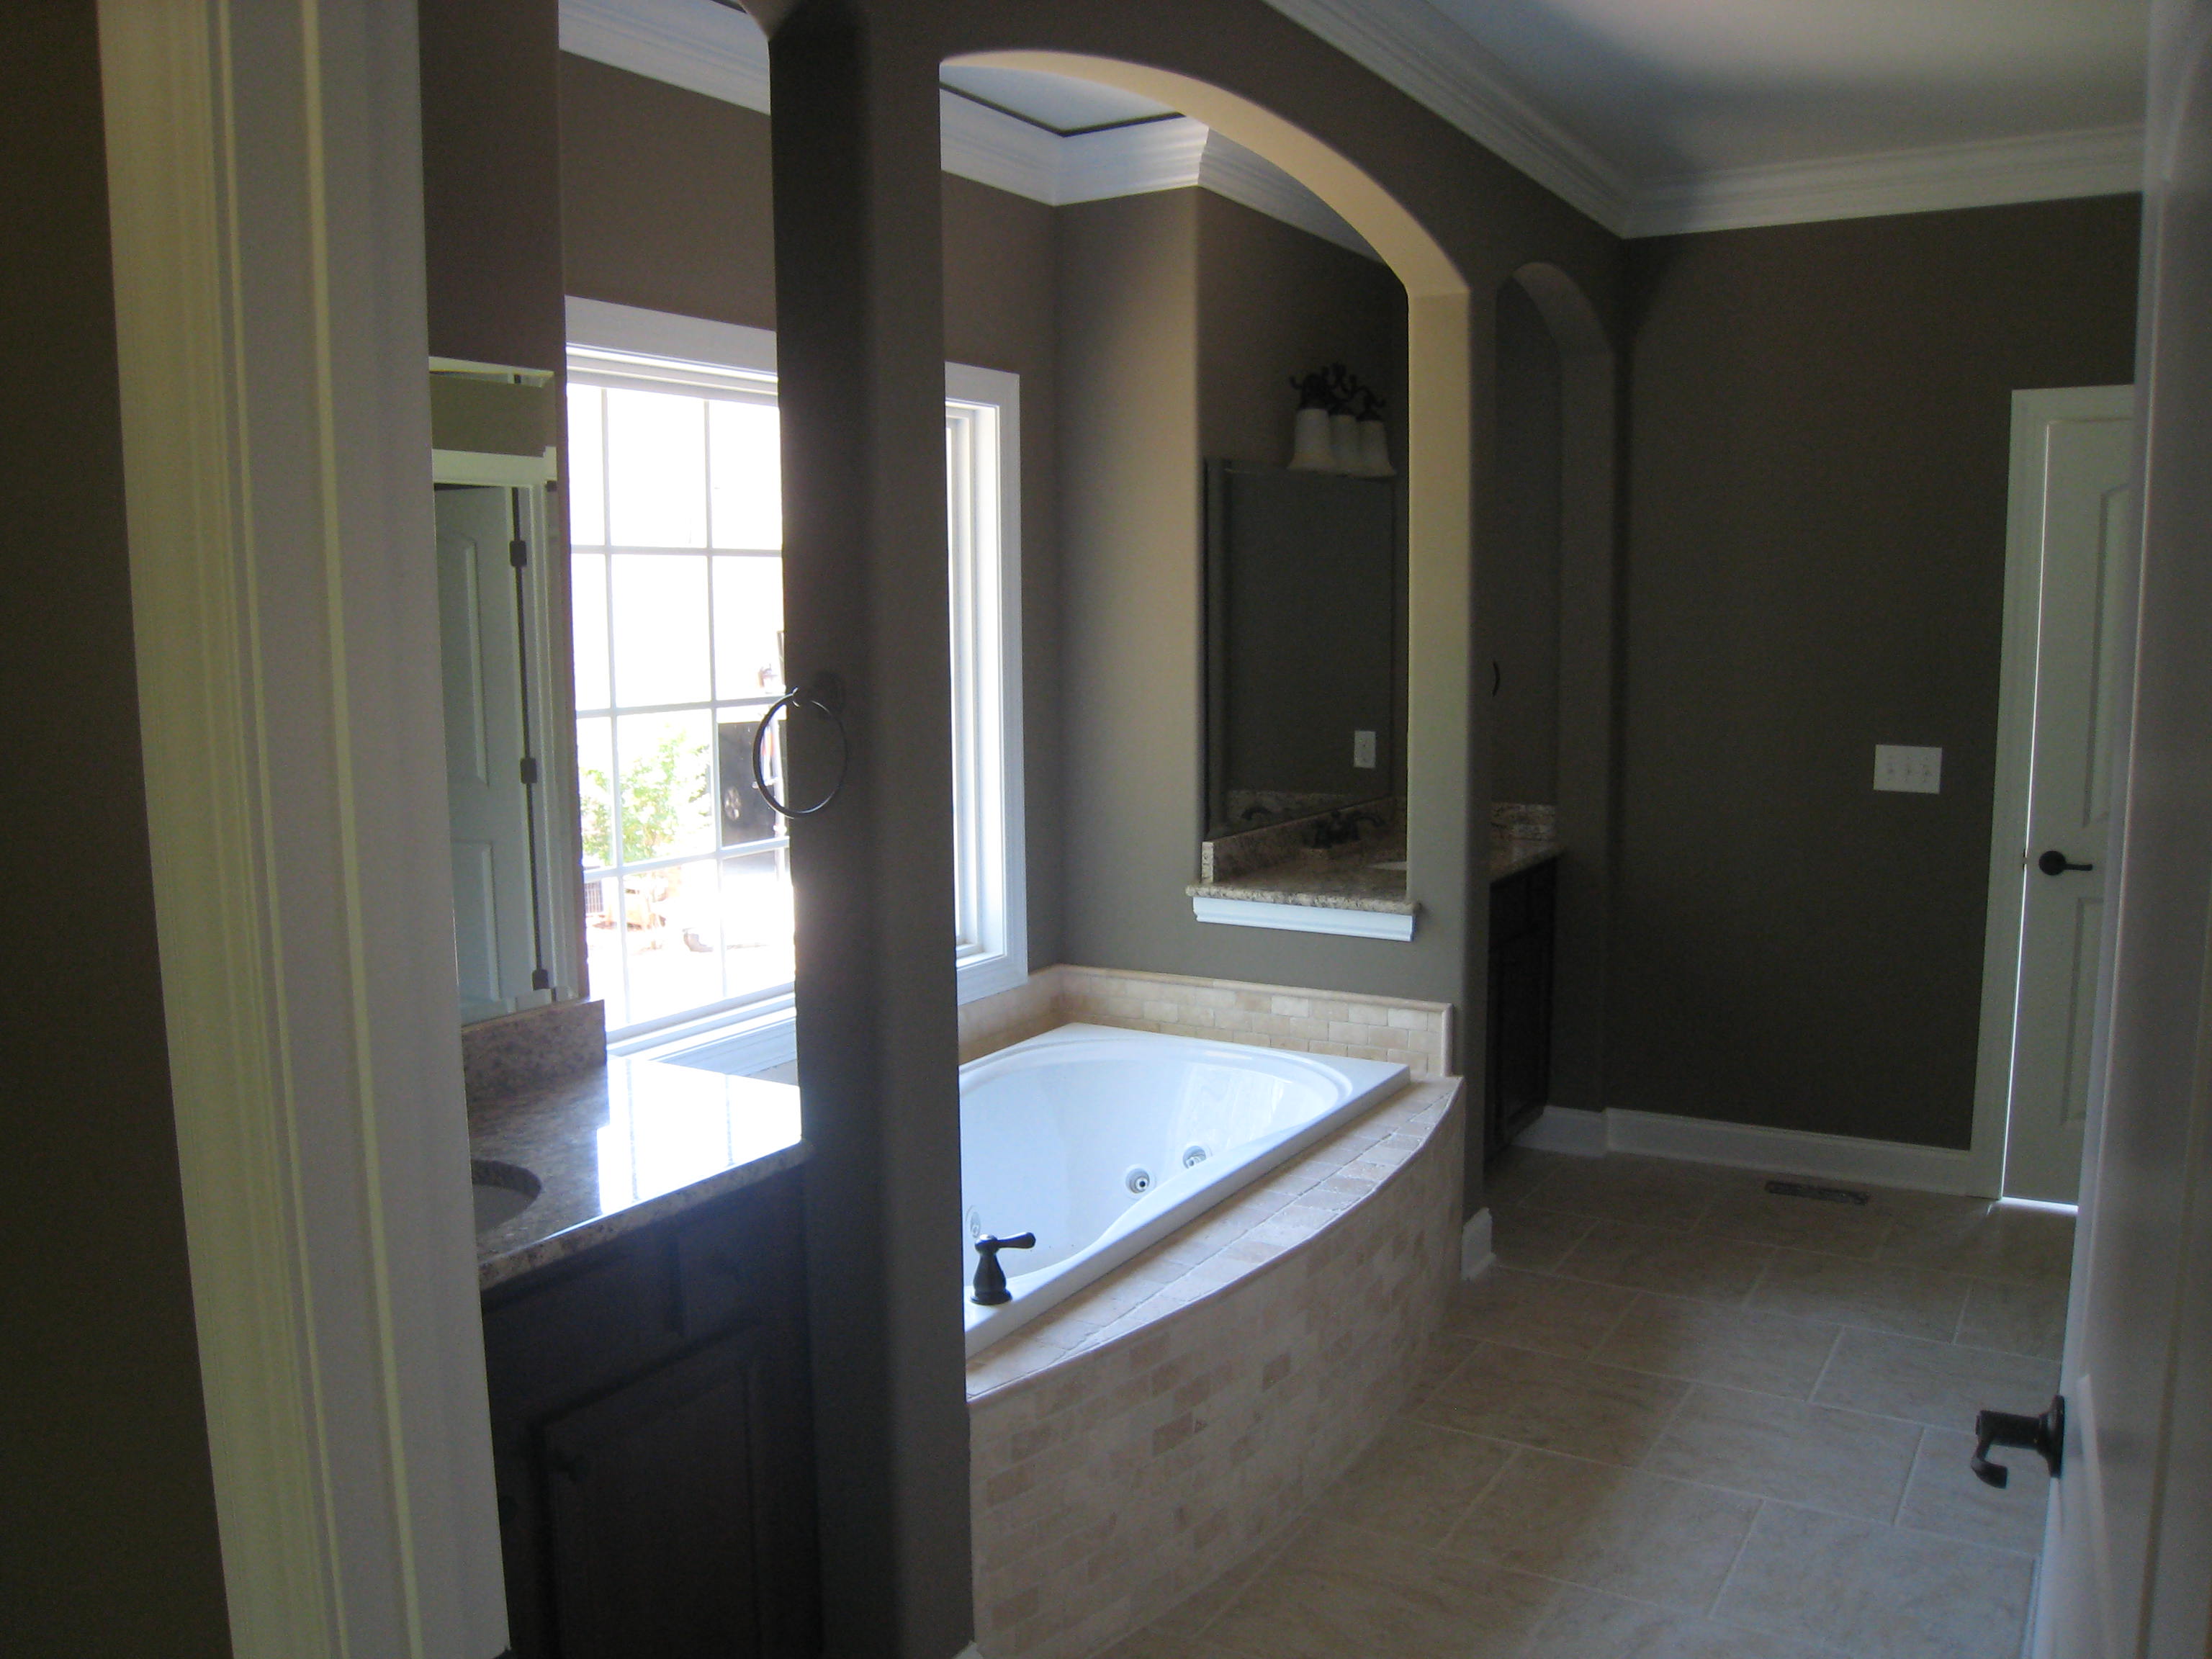 Bathtub design and installation executed by Hedrick Creative Building, LLC in Lexington, NC